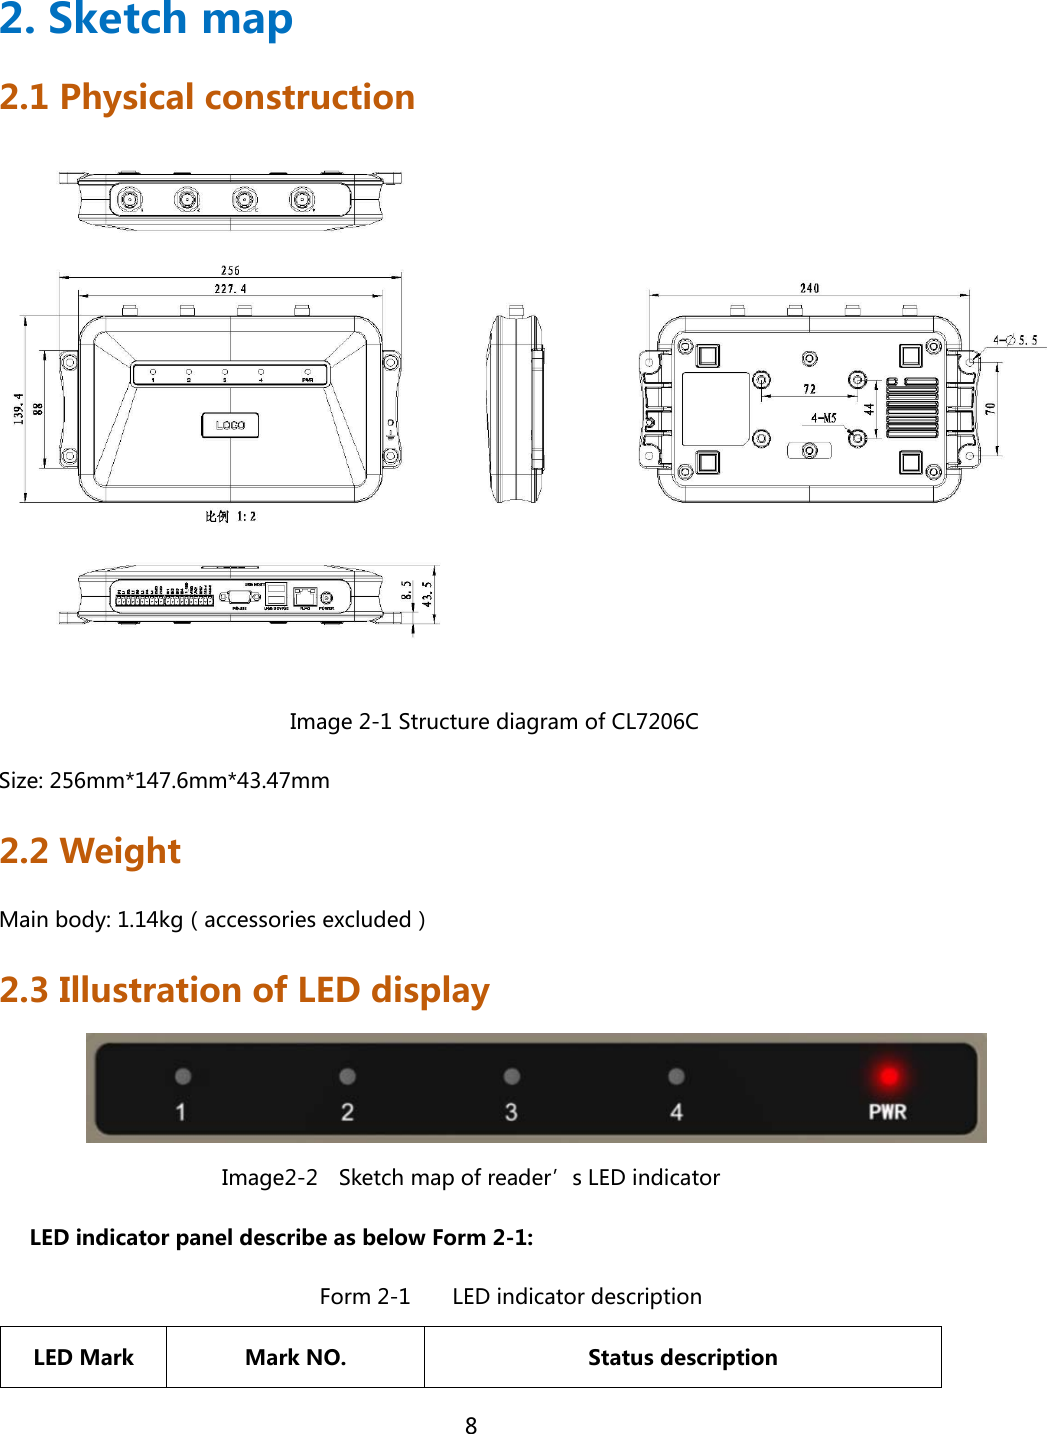  8  2. Sketch map 2.1 Physical construction  Image 2-1 Structure diagram of CL7206C Size: 256mm*147.6mm*43.47mm 2.2 Weight Main body: 1.14kg（accessories excluded） 2.3 Illustration of LED display  Image2-2    Sketch map of reader’s LED indicator LED indicator panel describe as below Form 2-1:                       Form 2-1    LED indicator description LED Mark  Mark NO.  Status description 